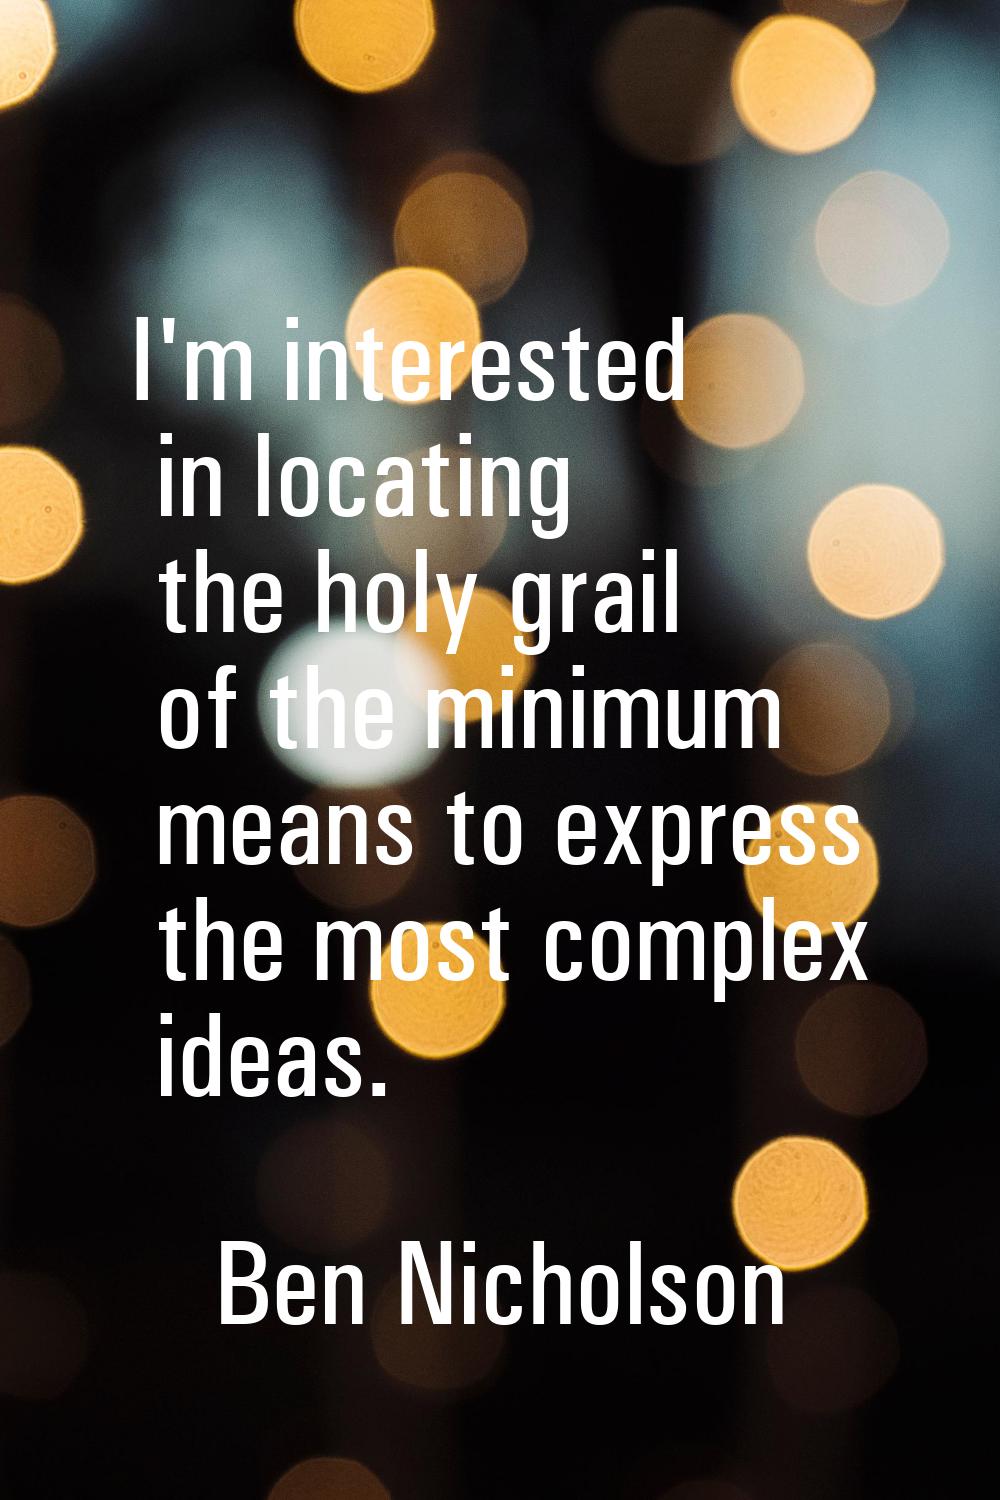 I'm interested in locating the holy grail of the minimum means to express the most complex ideas.